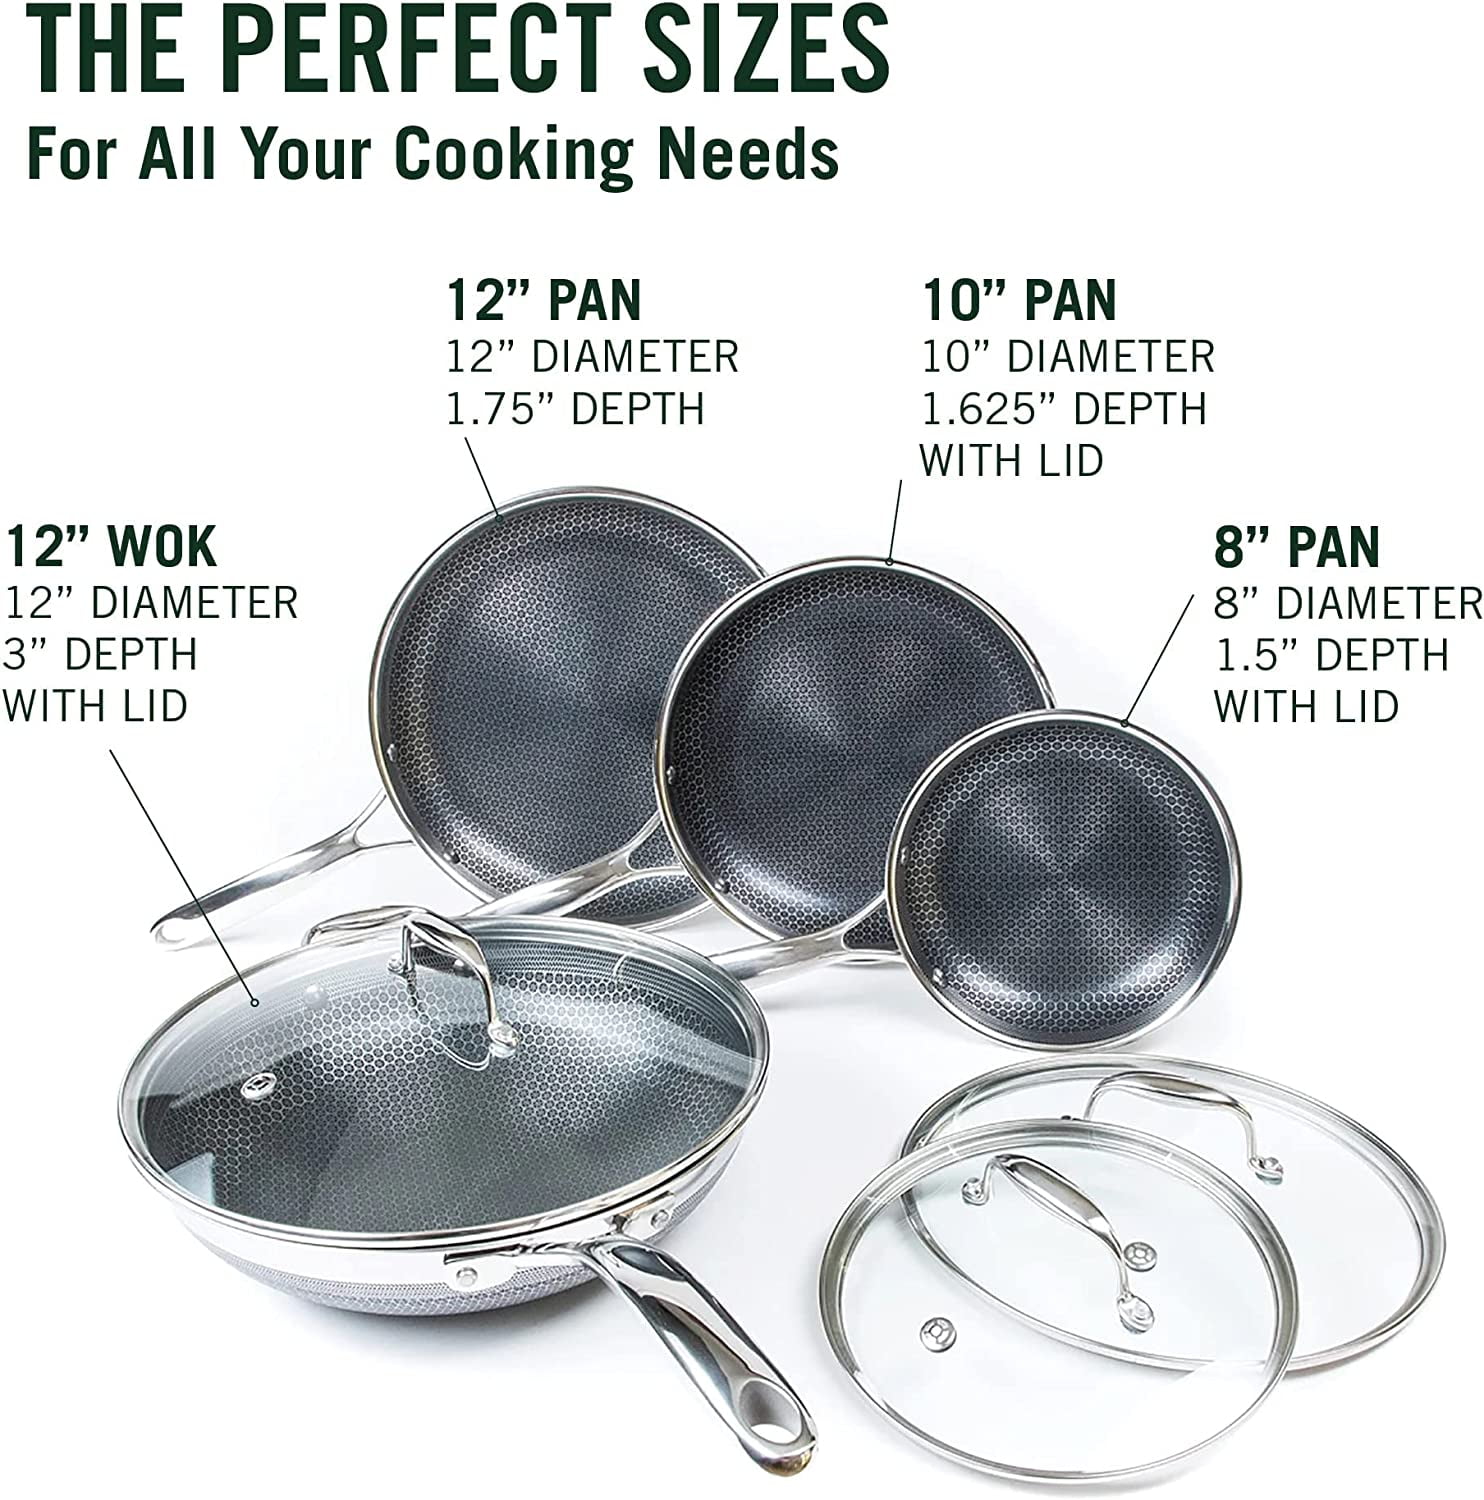 HexClad 7-Piece Hybrid Stainless Steel Cookware Set with Lids and